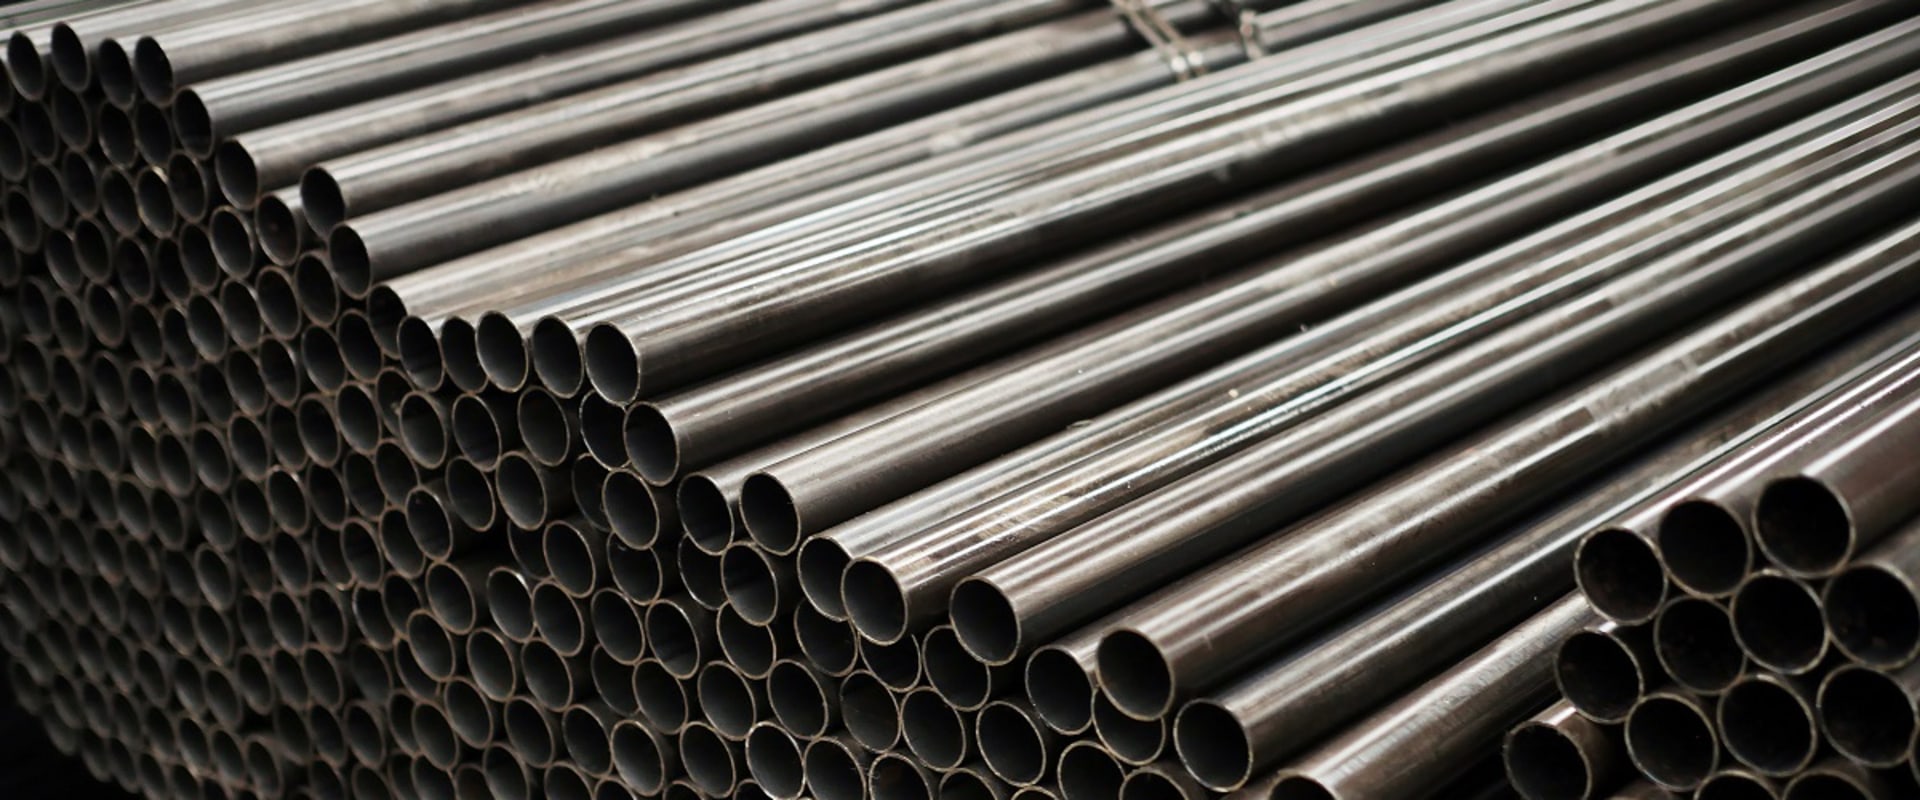 Is black gas pipe steel or iron?